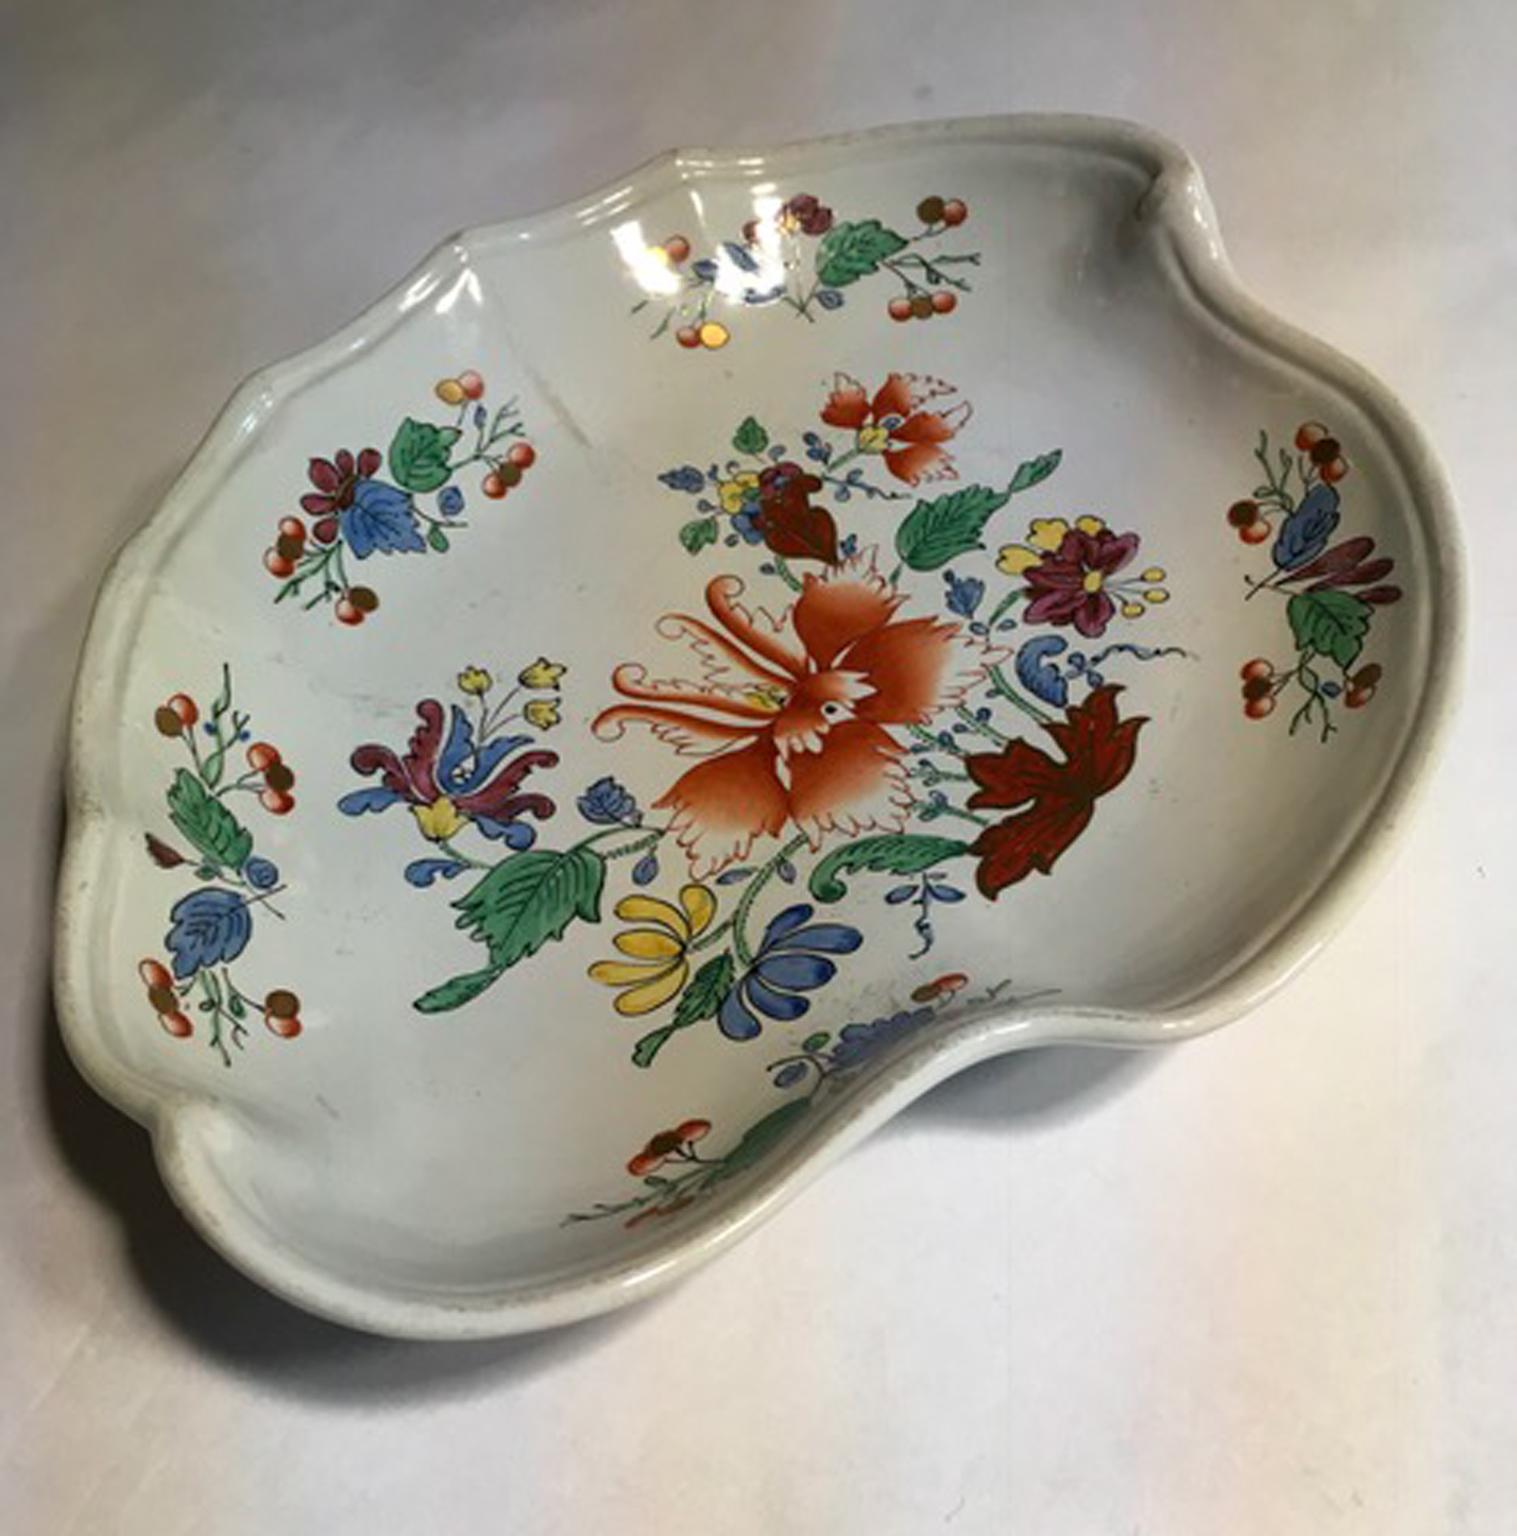 Italy Richard Ginori Mid-18th Century Porcelain Hand Painted Tulip Decor Bowl For Sale 2